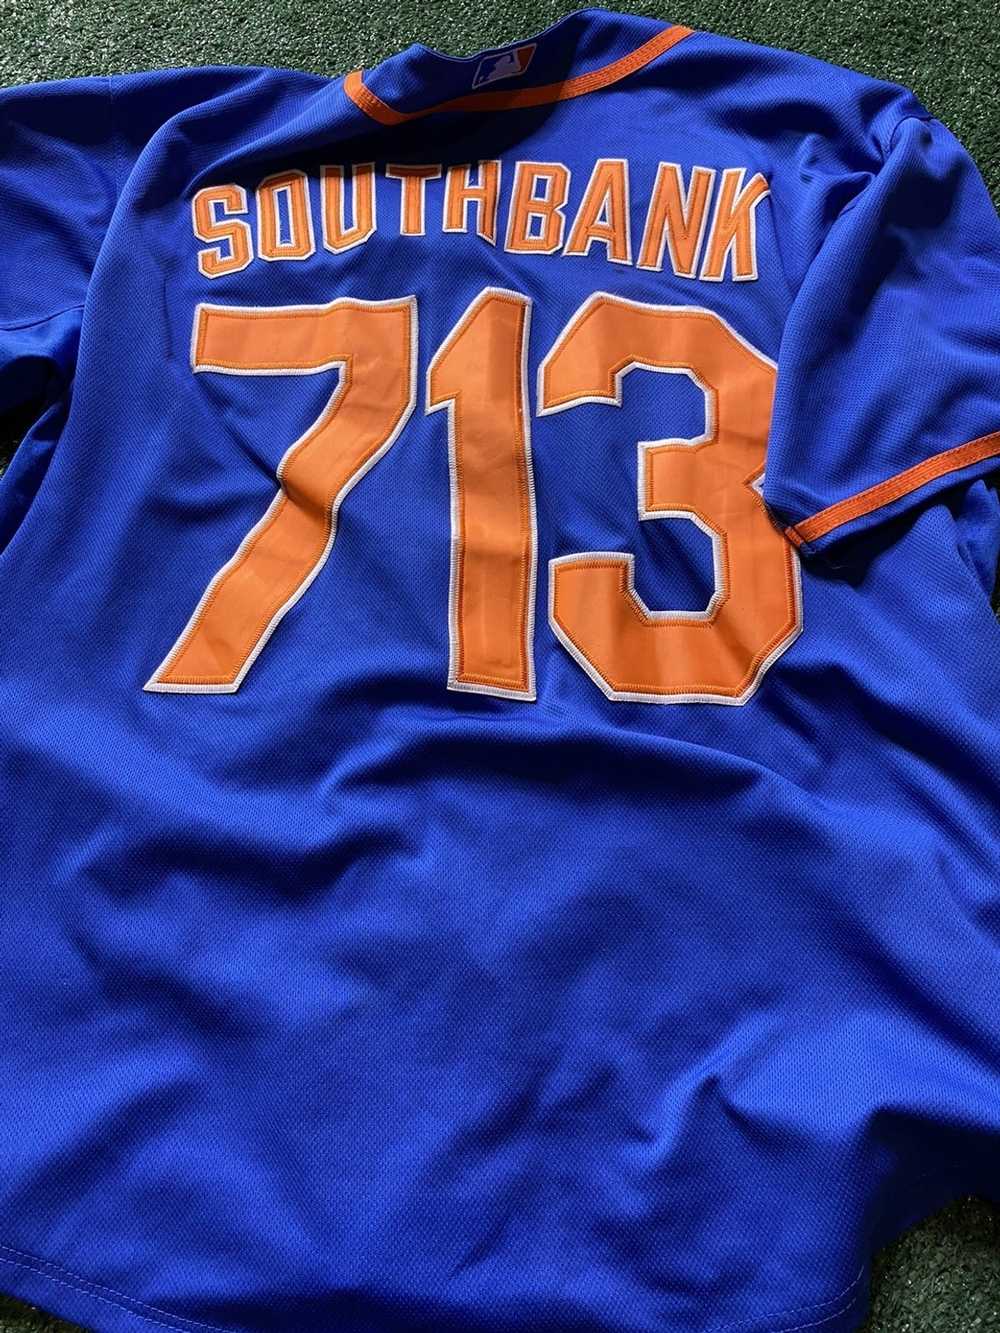 Mets New York Mets 713 Southbank Jersey M Blue Or… - image 5